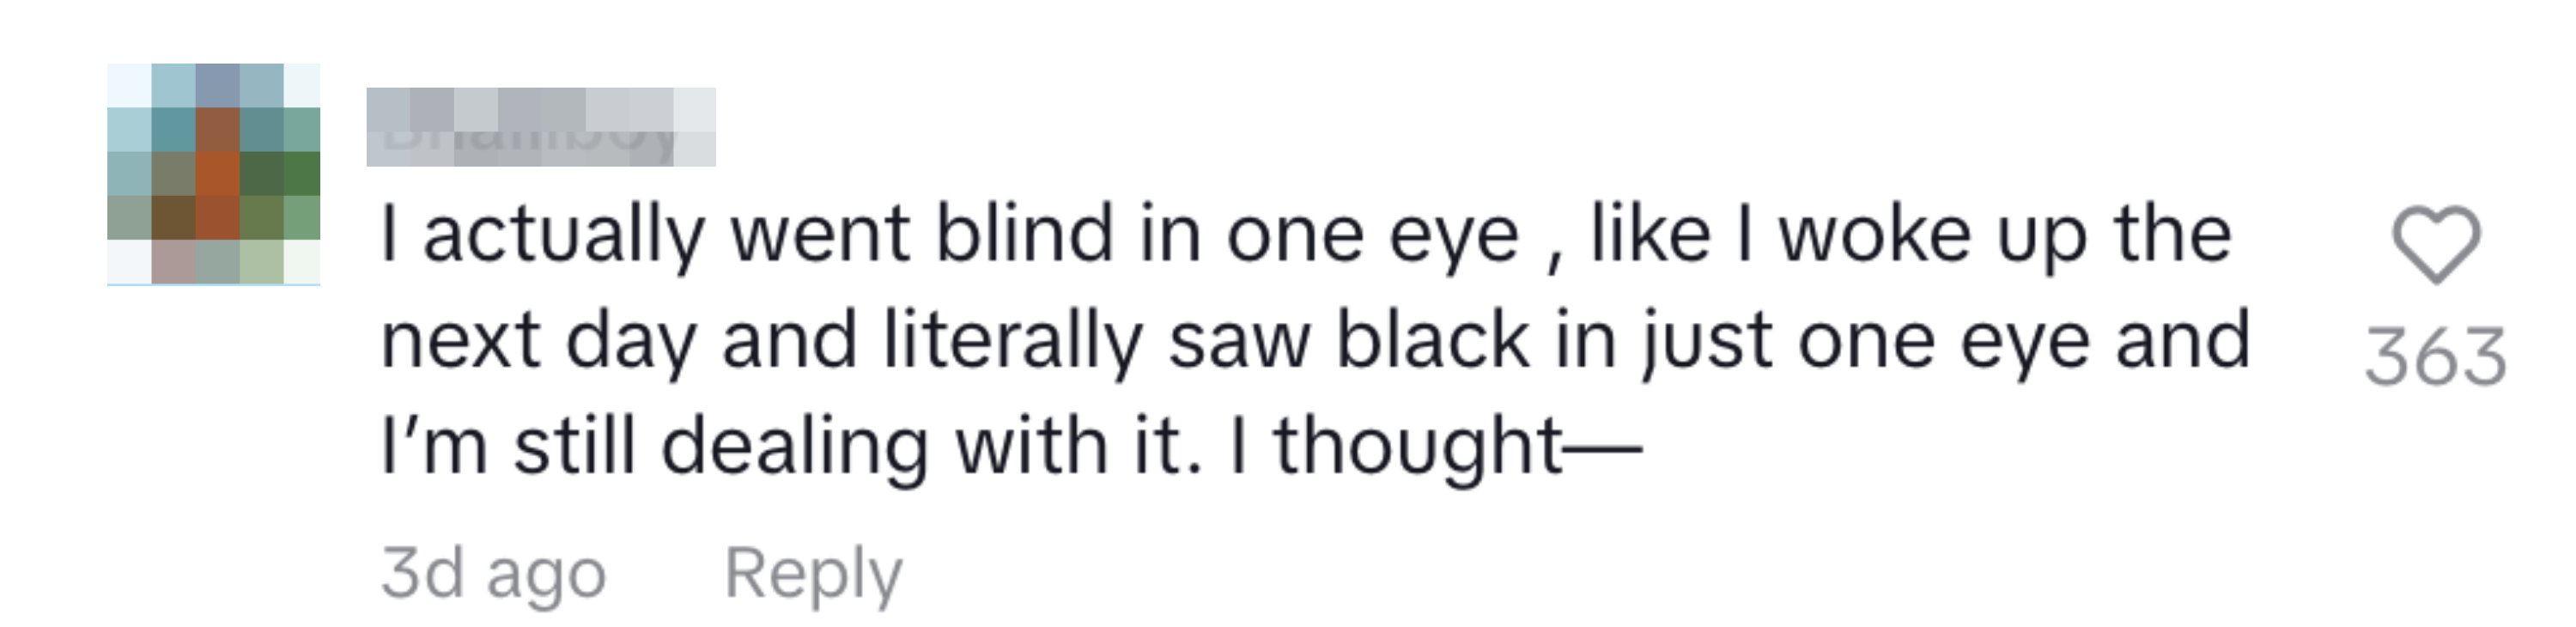 A screenshot of a social media comment by a user discussing a personal experience of suddenly going blind in one eye and coping with it